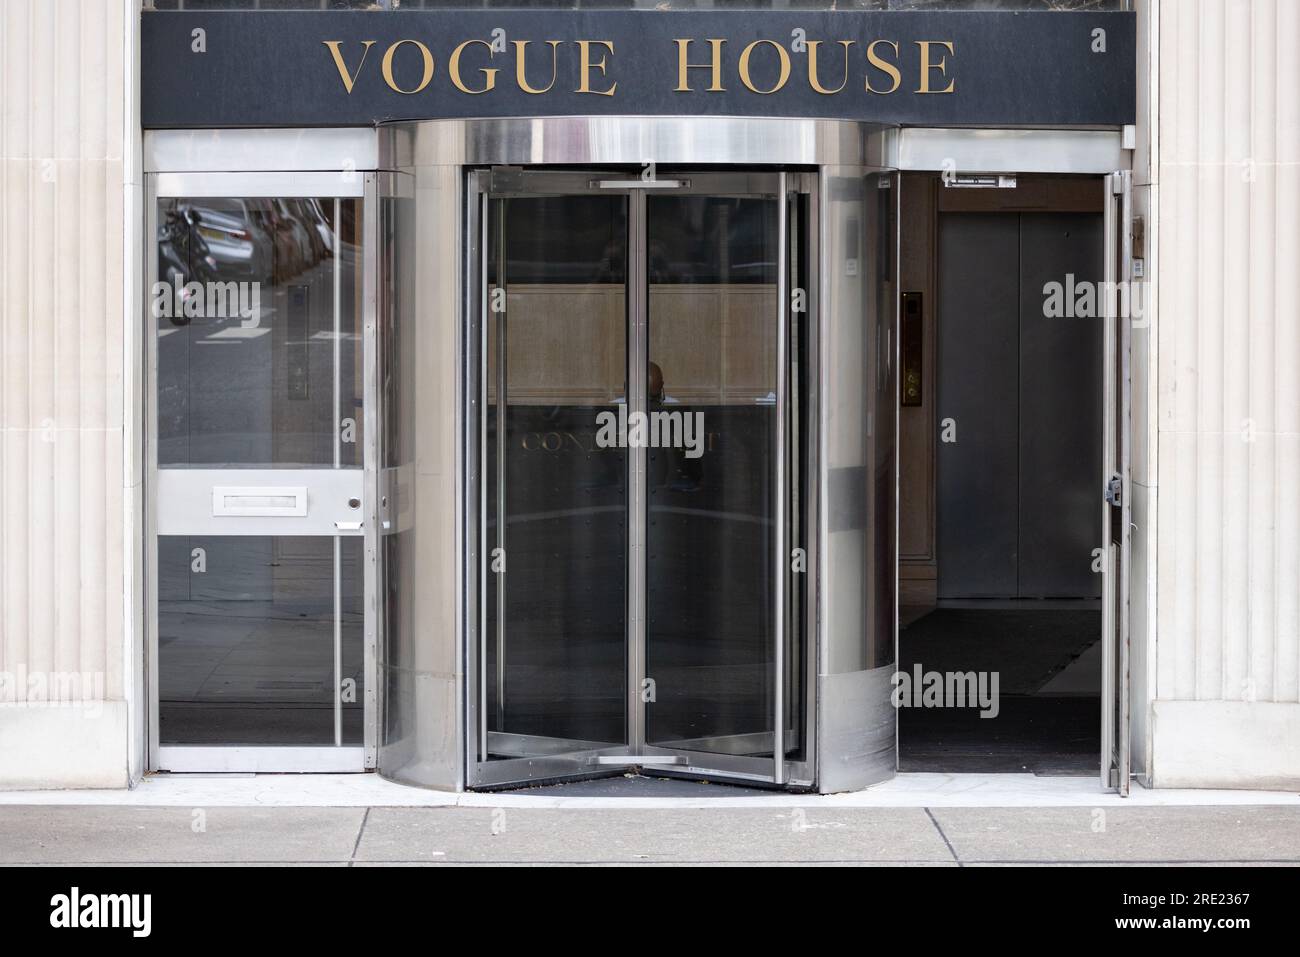 Vogue House, Home to the British Vogue magazine in London, the iconic 7 ...